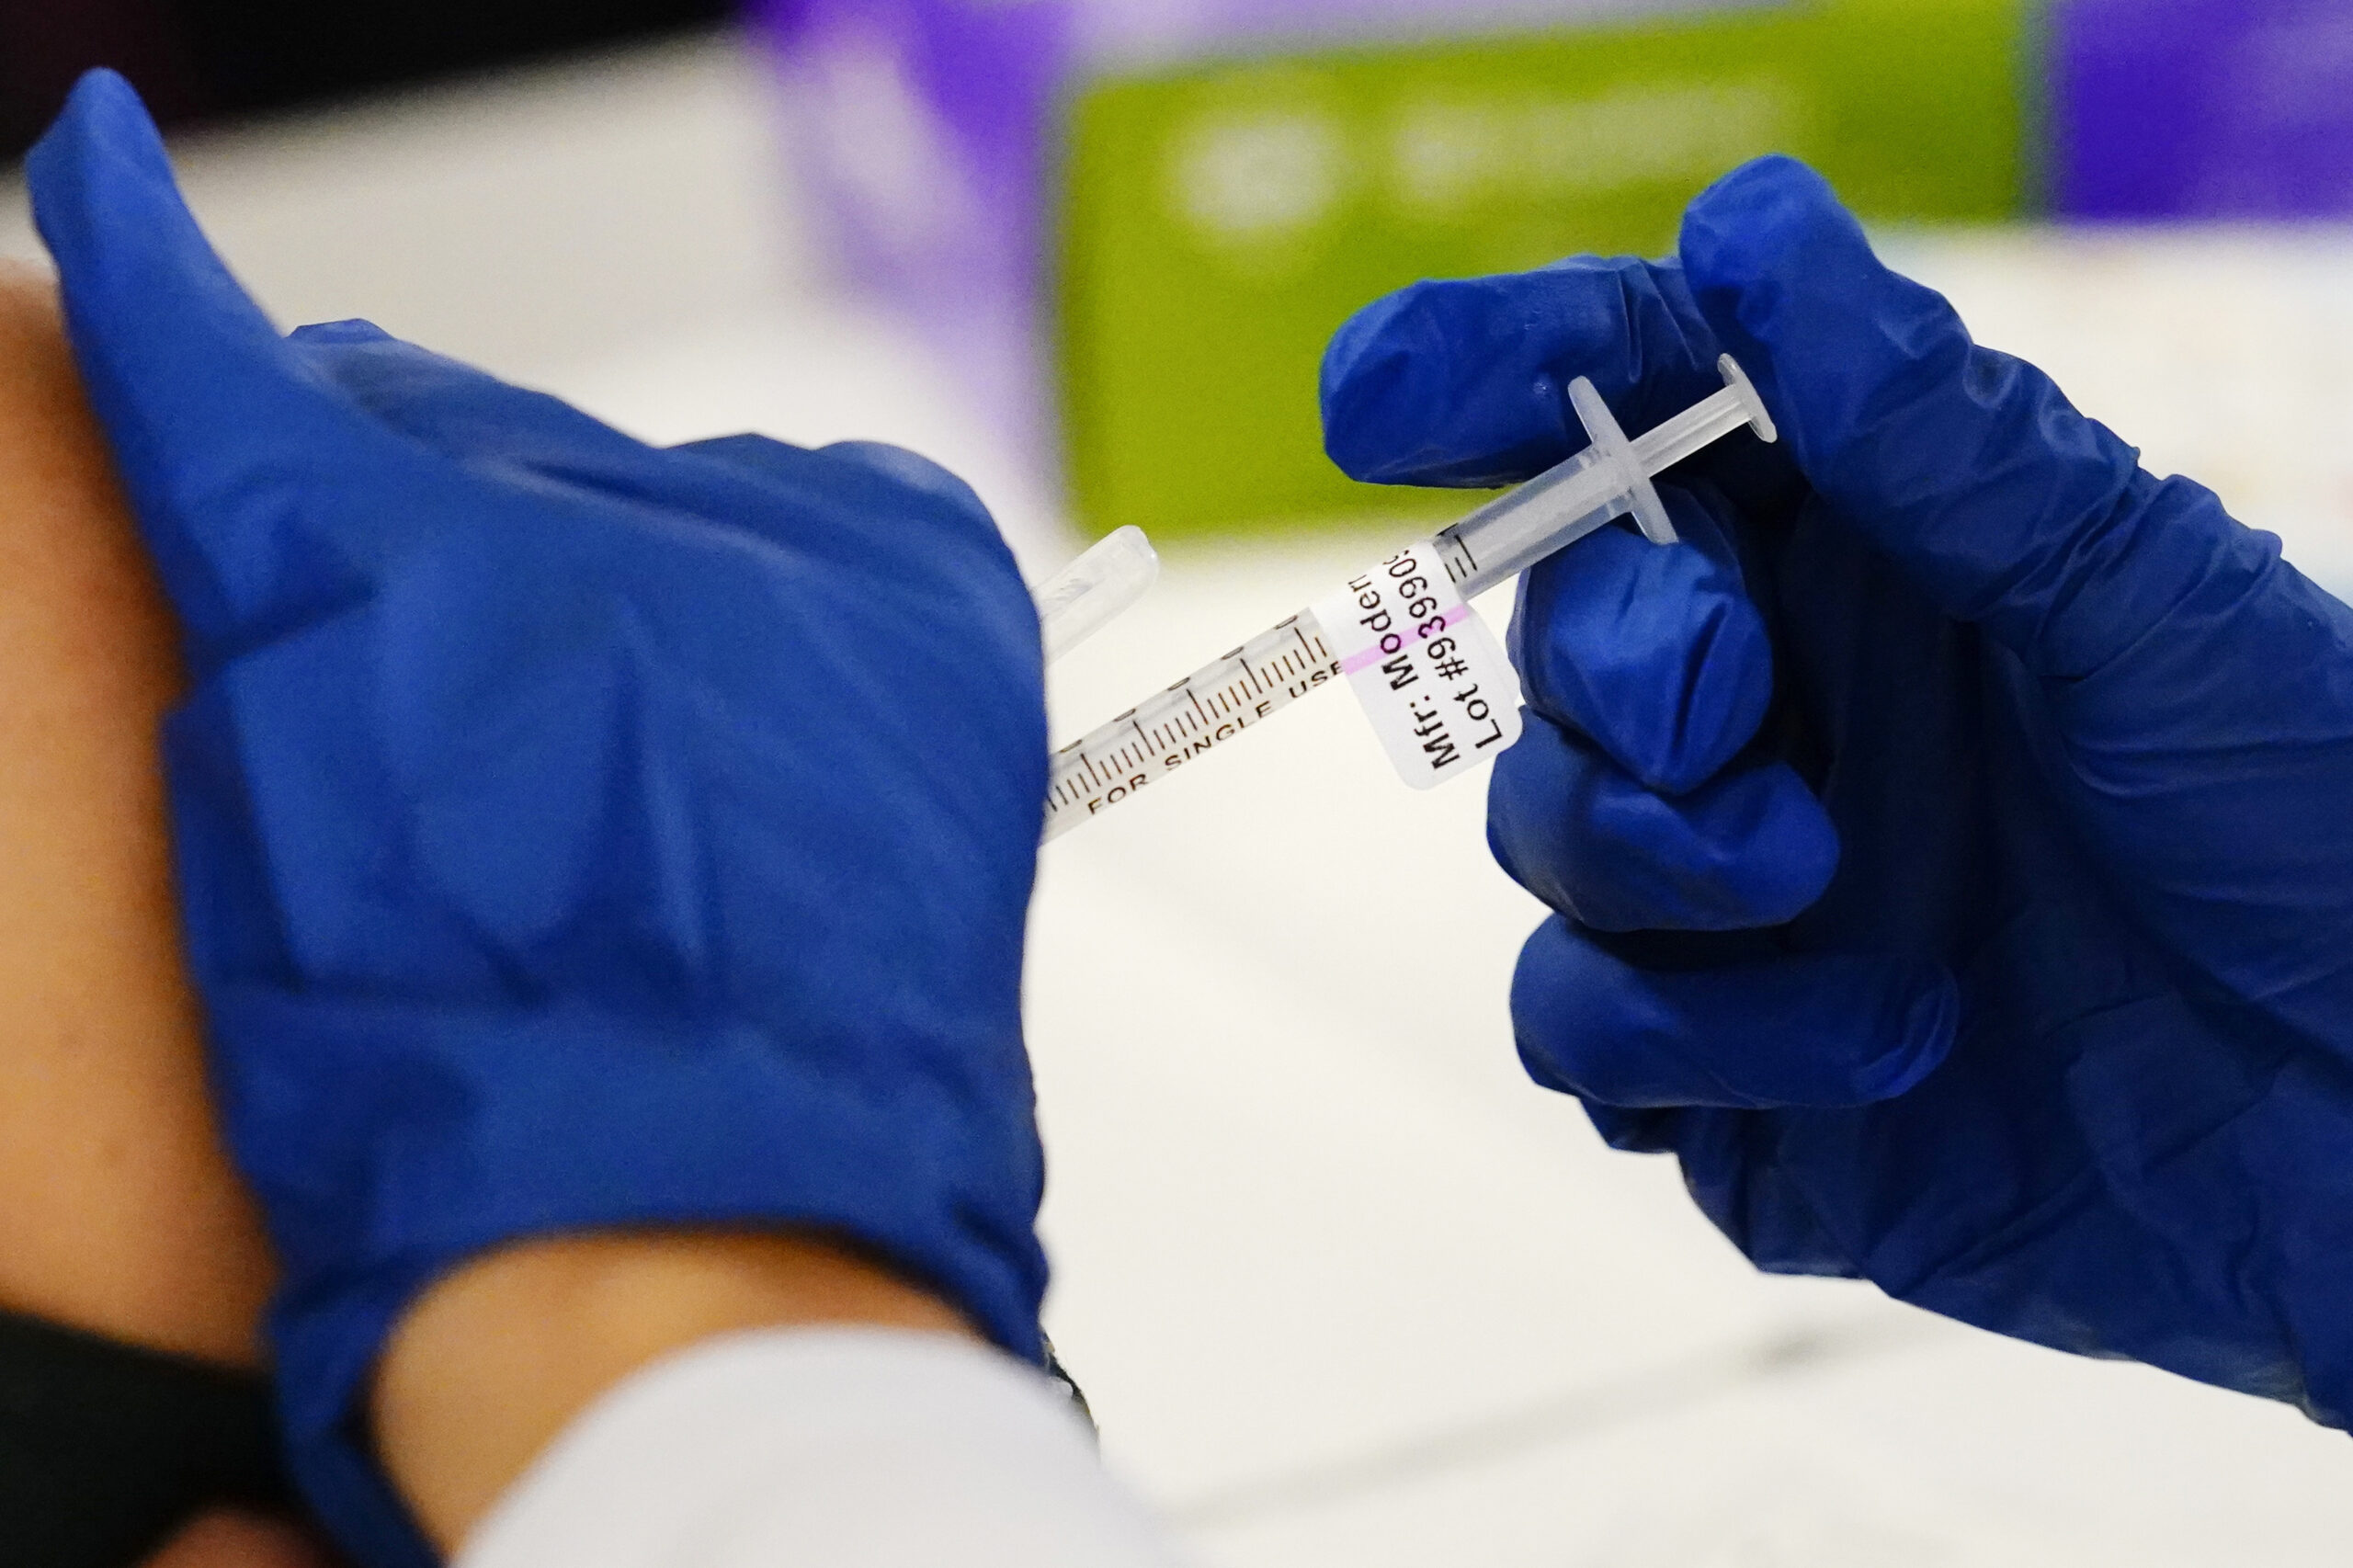 FILE - A health worker administers a dose of a Moderna COVID-19 vaccine during a vaccination clinic in Norristown, Pa., Tuesday, Dec. 7, 2021. Moderna on Thursday, April 28, 2022, asked U.S. regulators to authorize low doses of its COVID-19 vaccine for children younger than 6, a long-awaited move toward potentially opening shots for millions of tots by summer.(AP Photo/Matt Rourke, File)